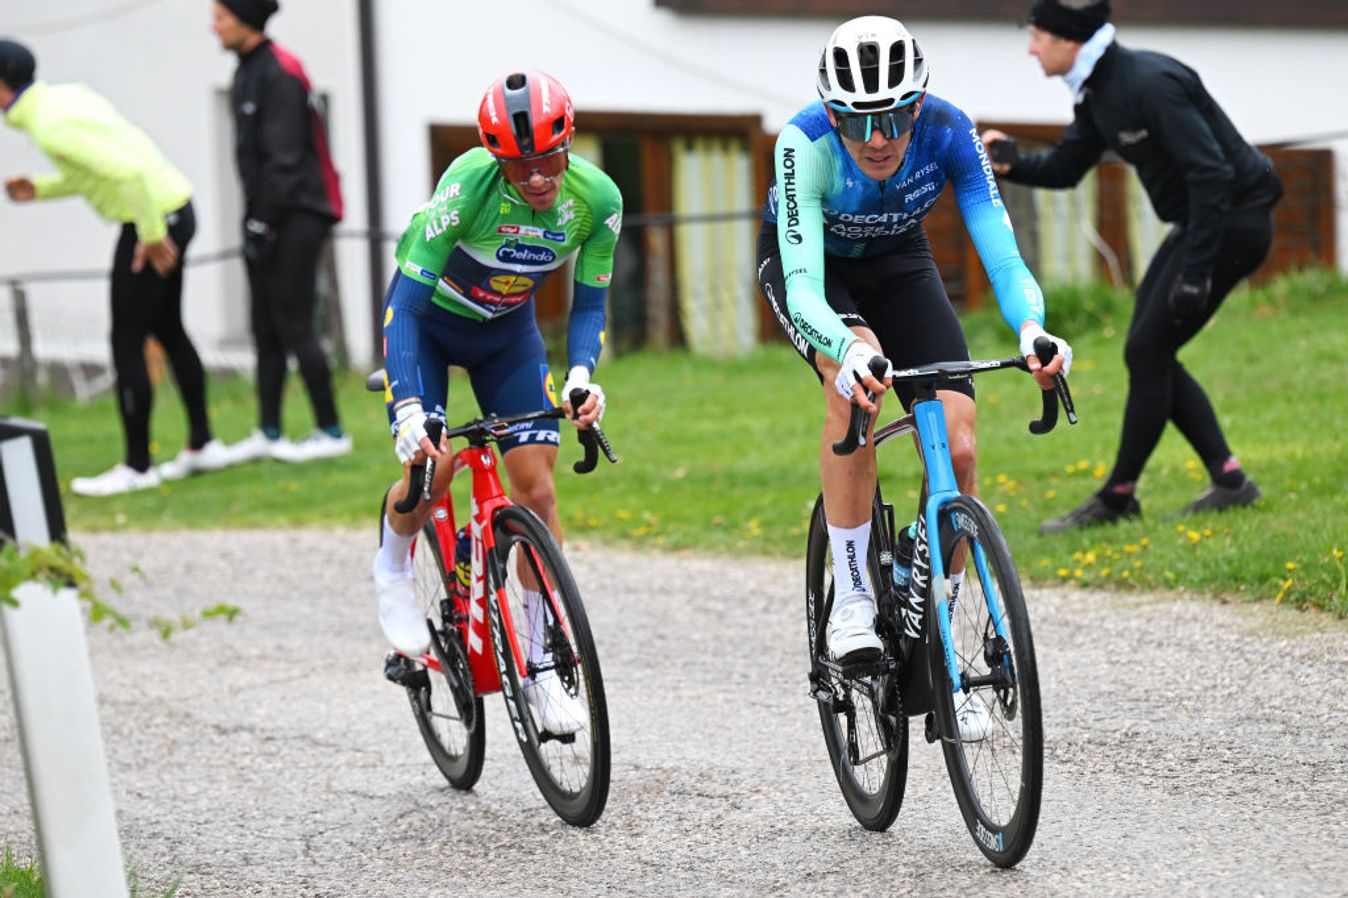 Ben O'Connor rode to second overall at the Tour of the Alps